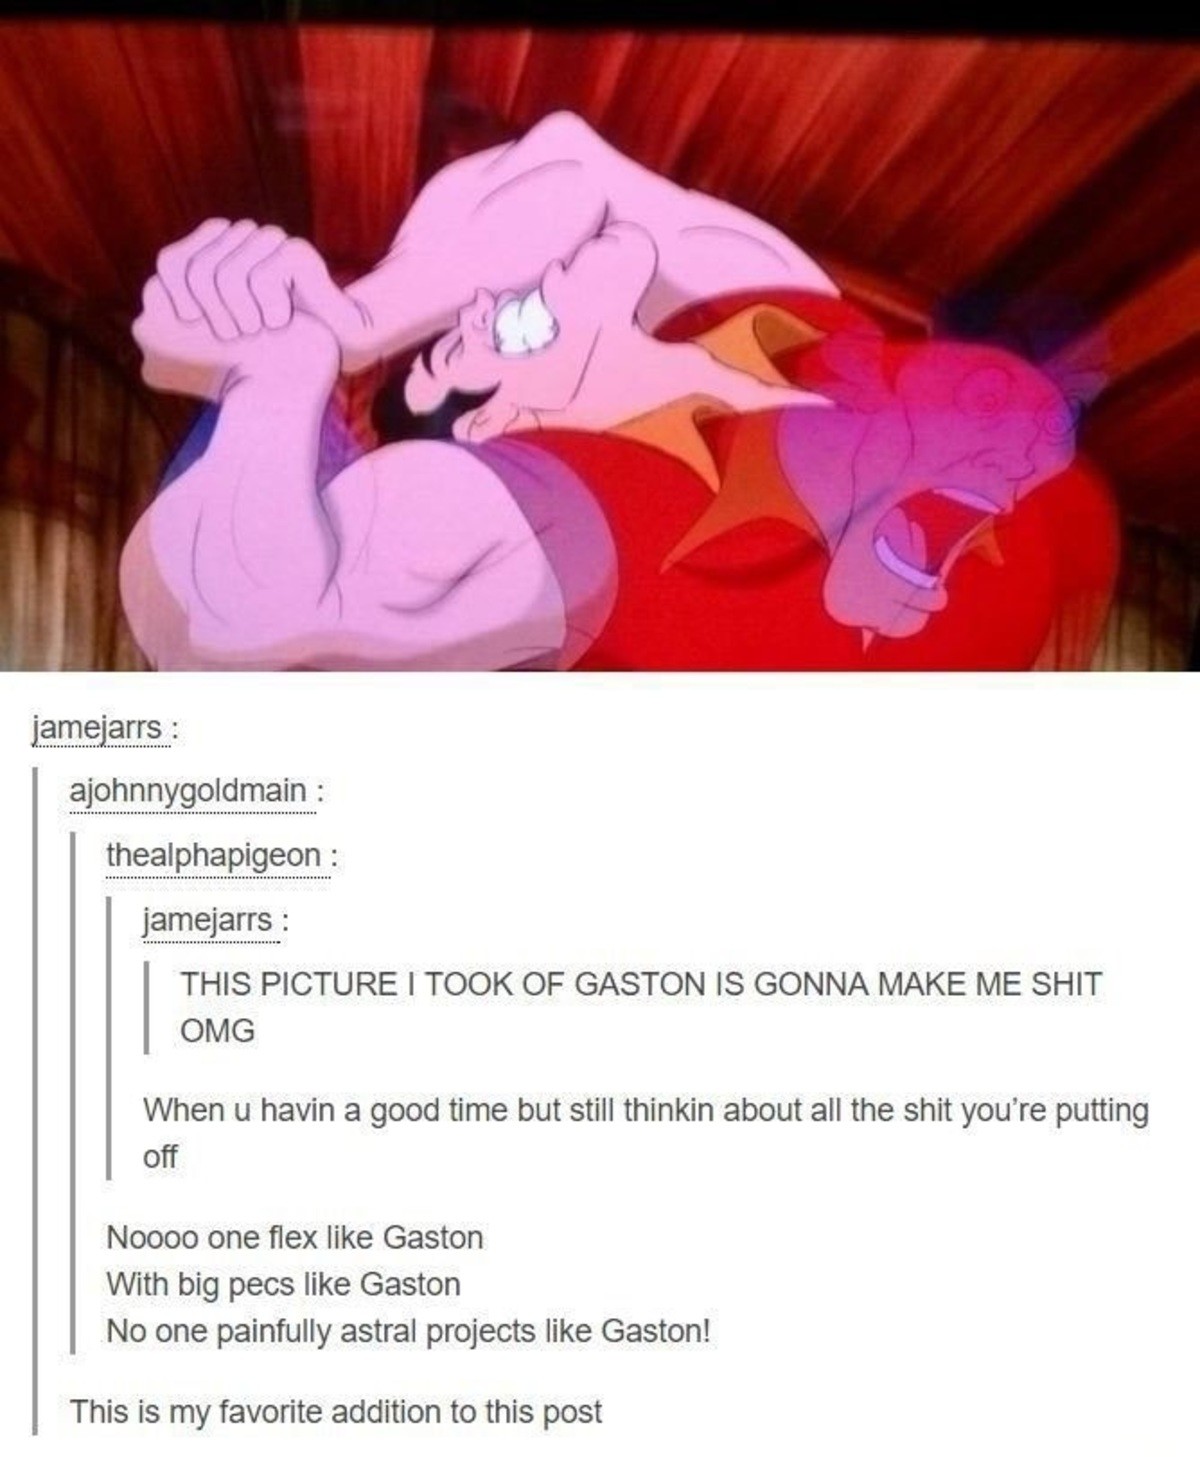 aggressive impolite Caribou. .. So Gaston is his own stand?